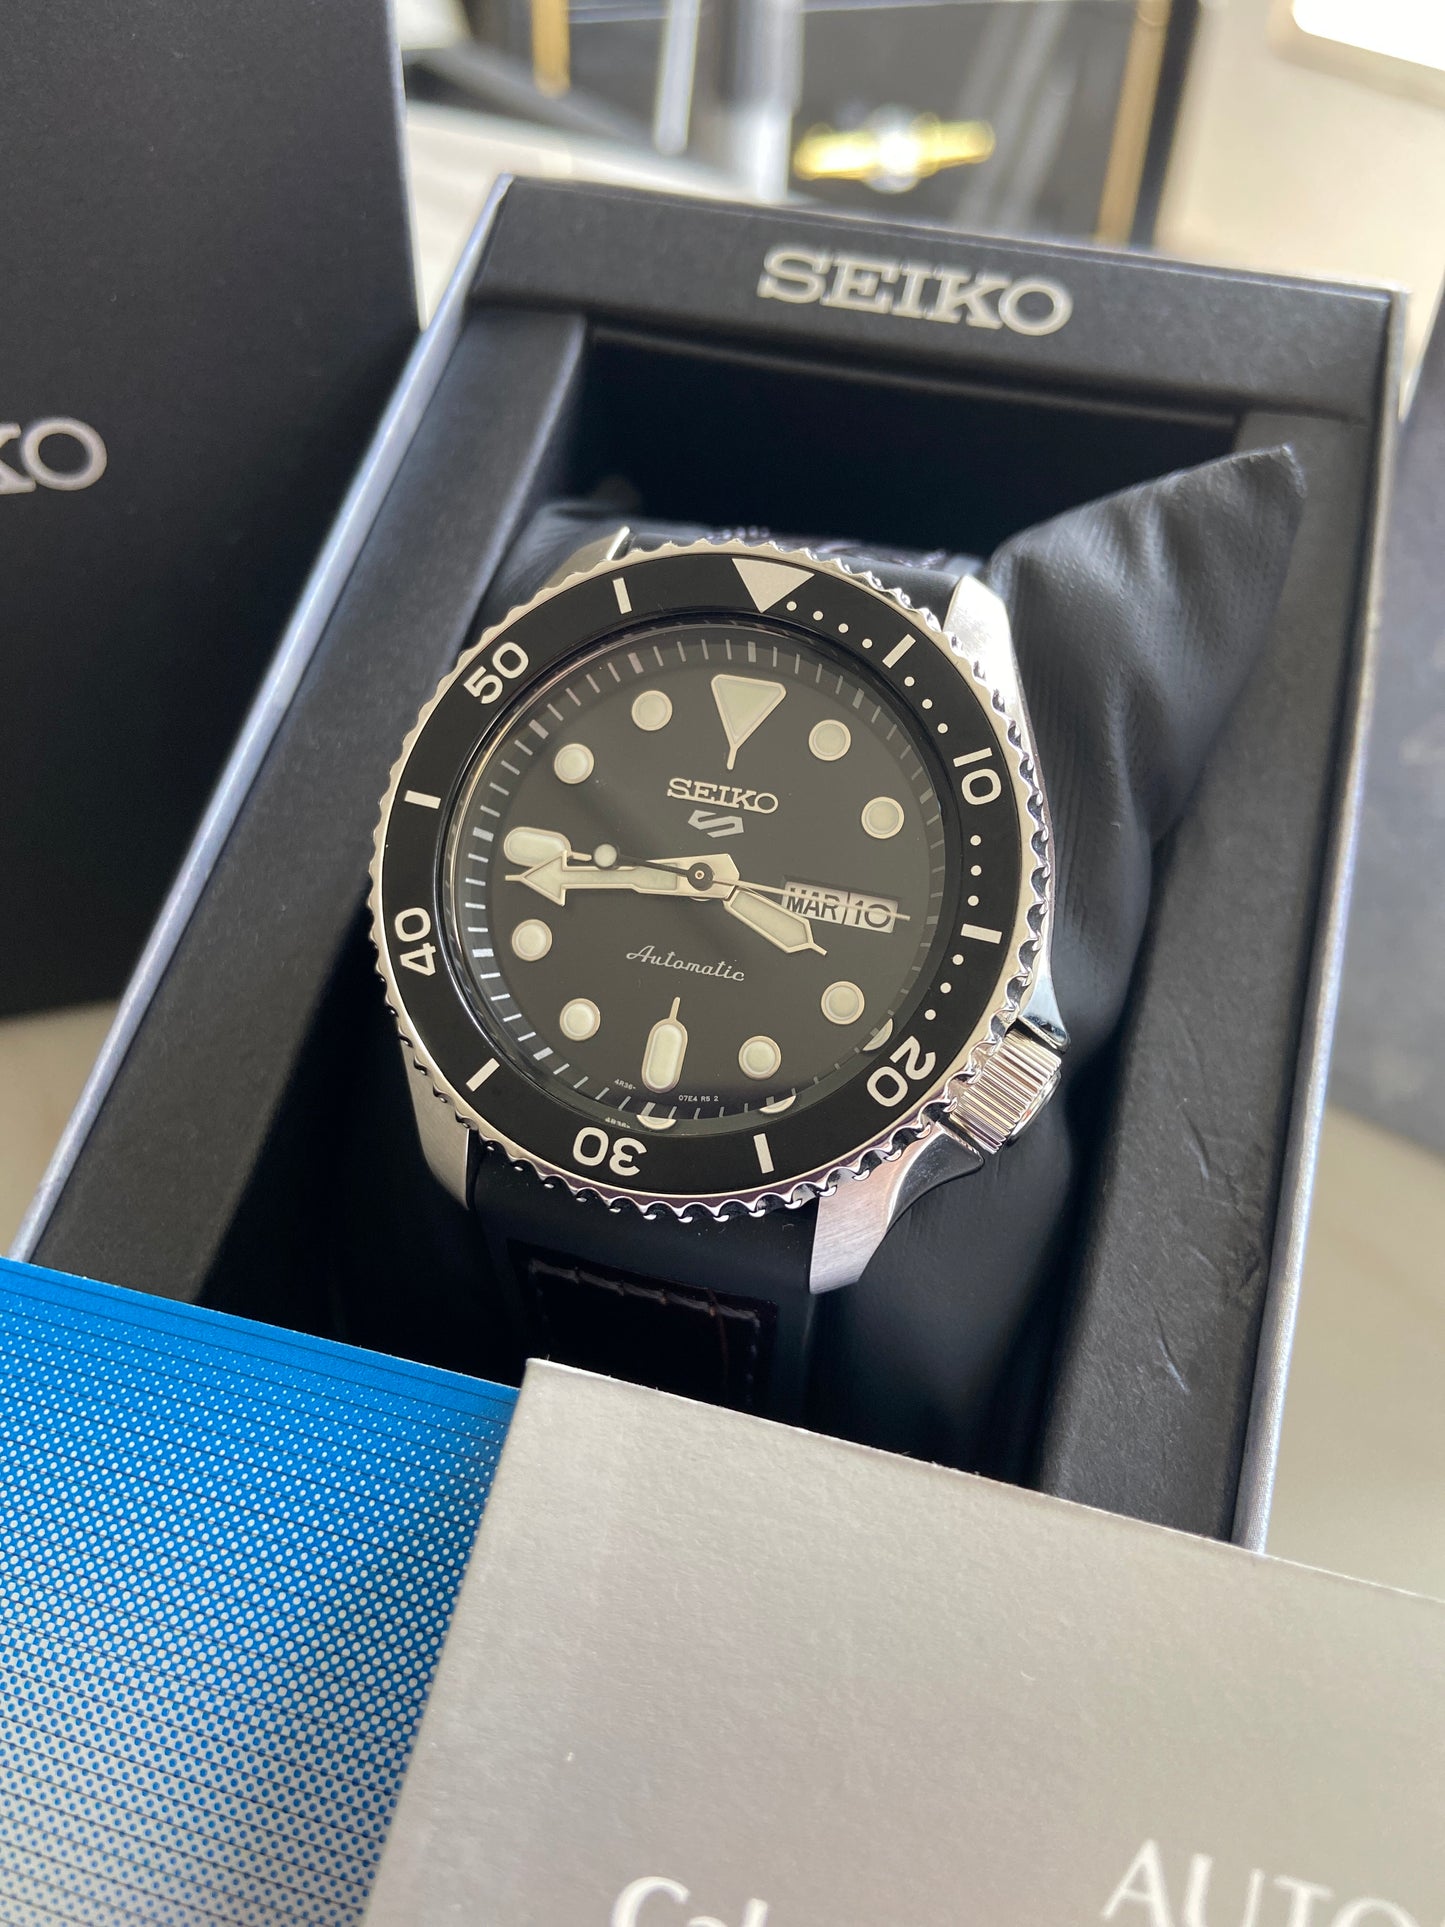 Seiko 5 Sports Super Luminous SRPD55K2 Automatic 100m Black Dial Stainless Steel Rubber Silicone Watch